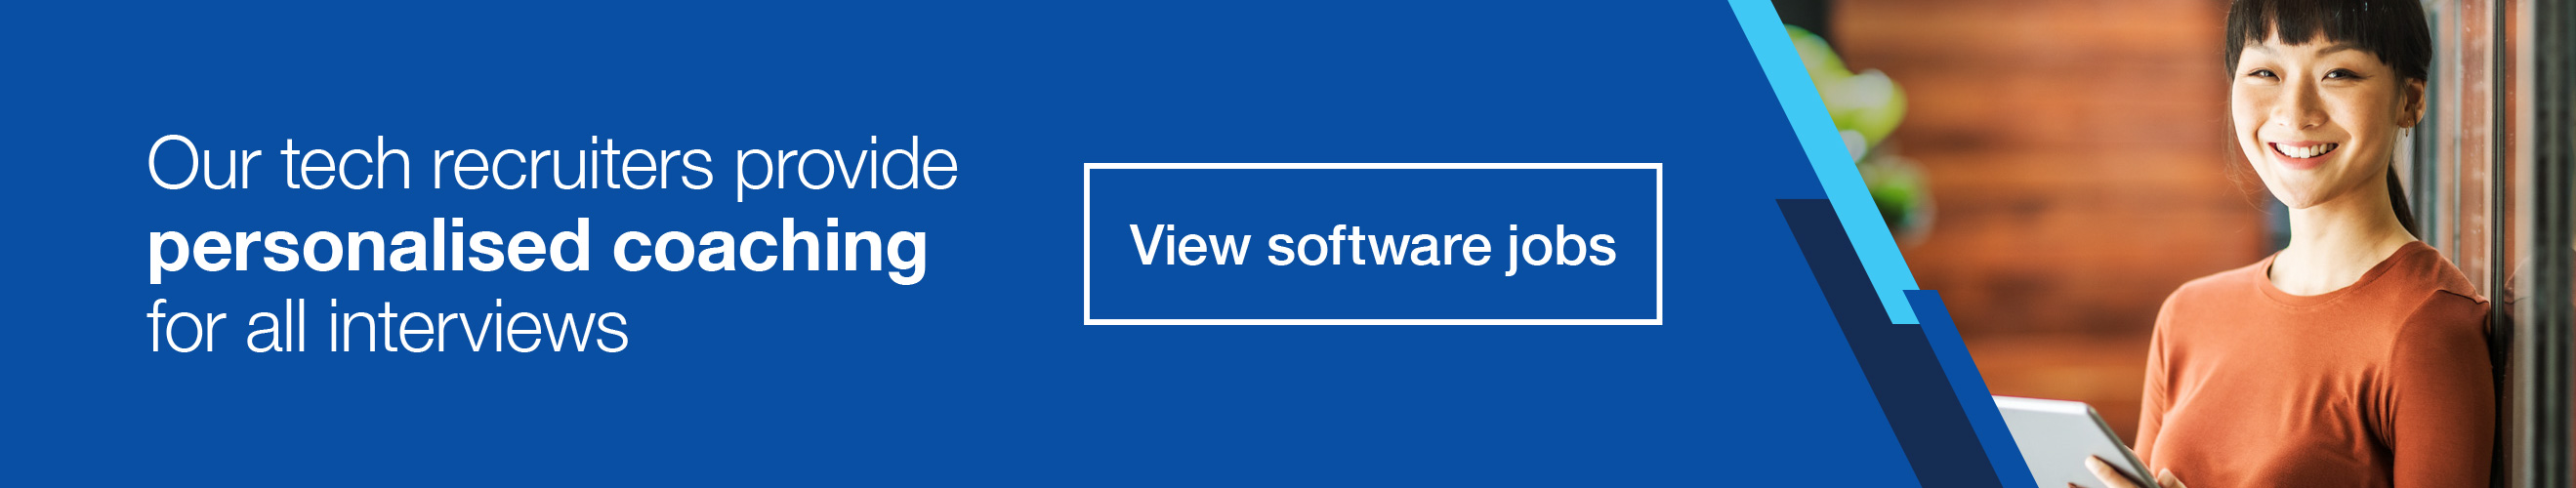 Our tech recruiters provide personalised coaching for all interviews. Click here to view software/IT jobs.